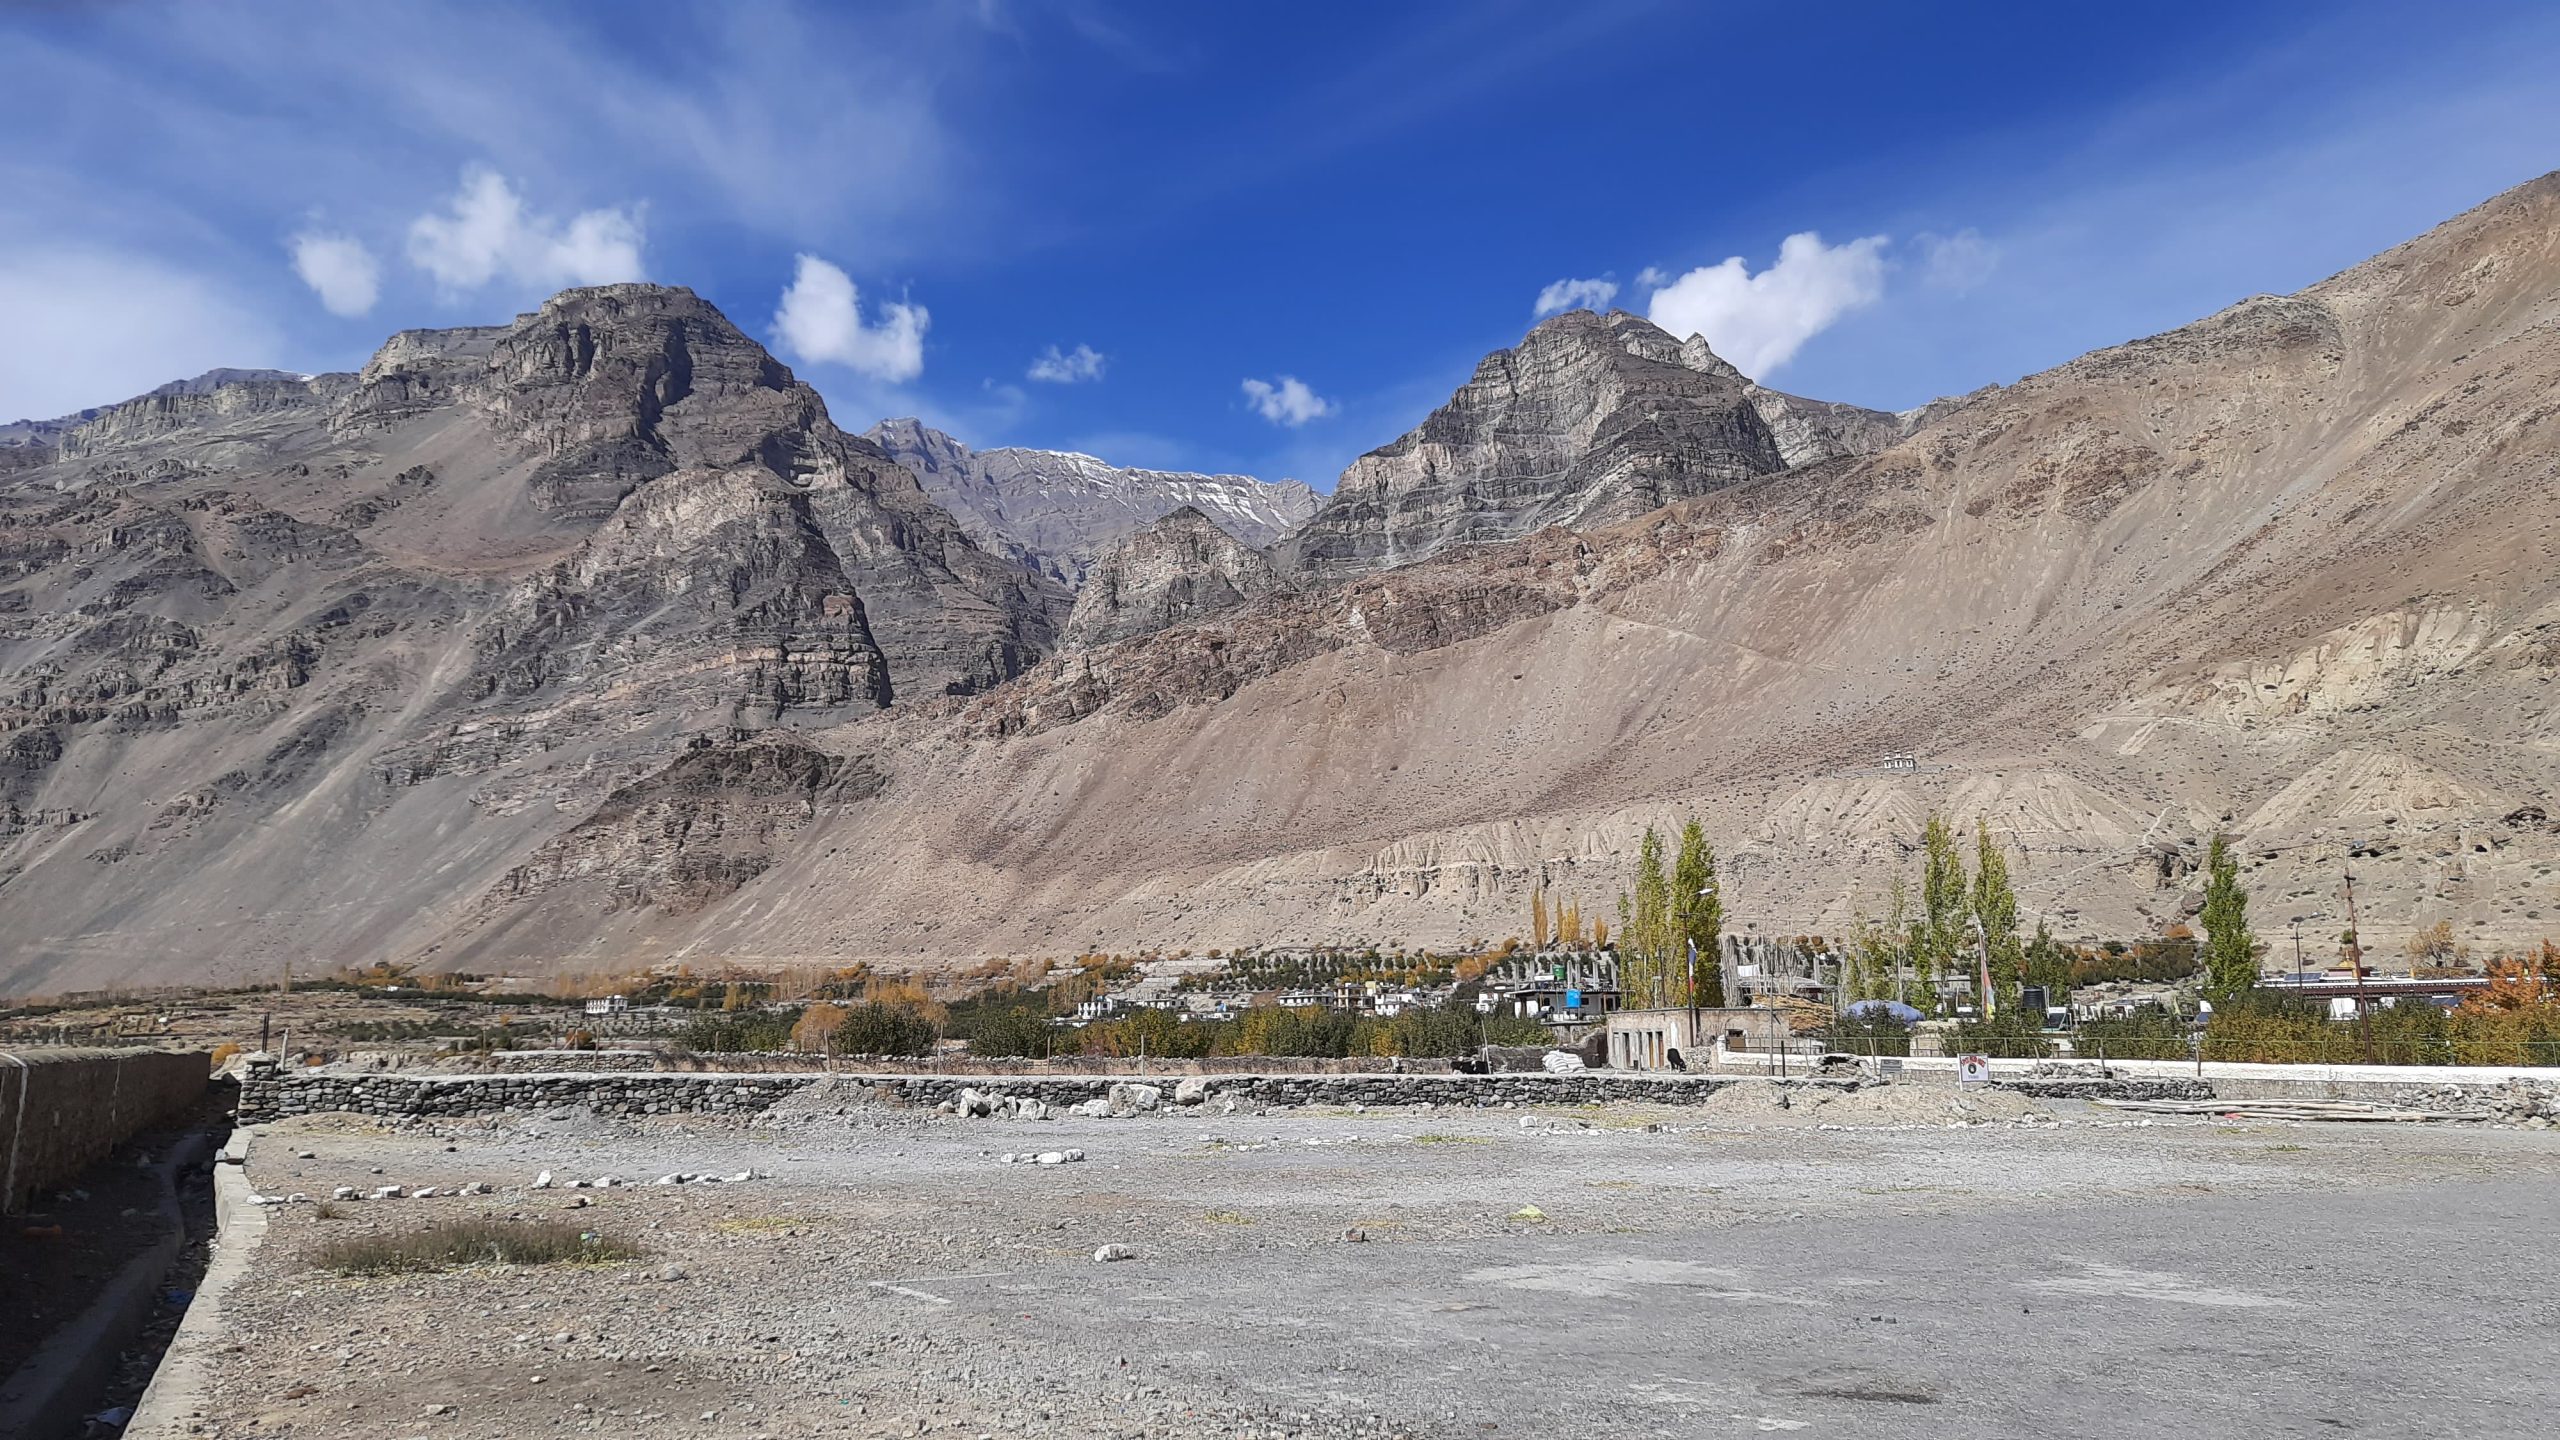 View of Tabo Village